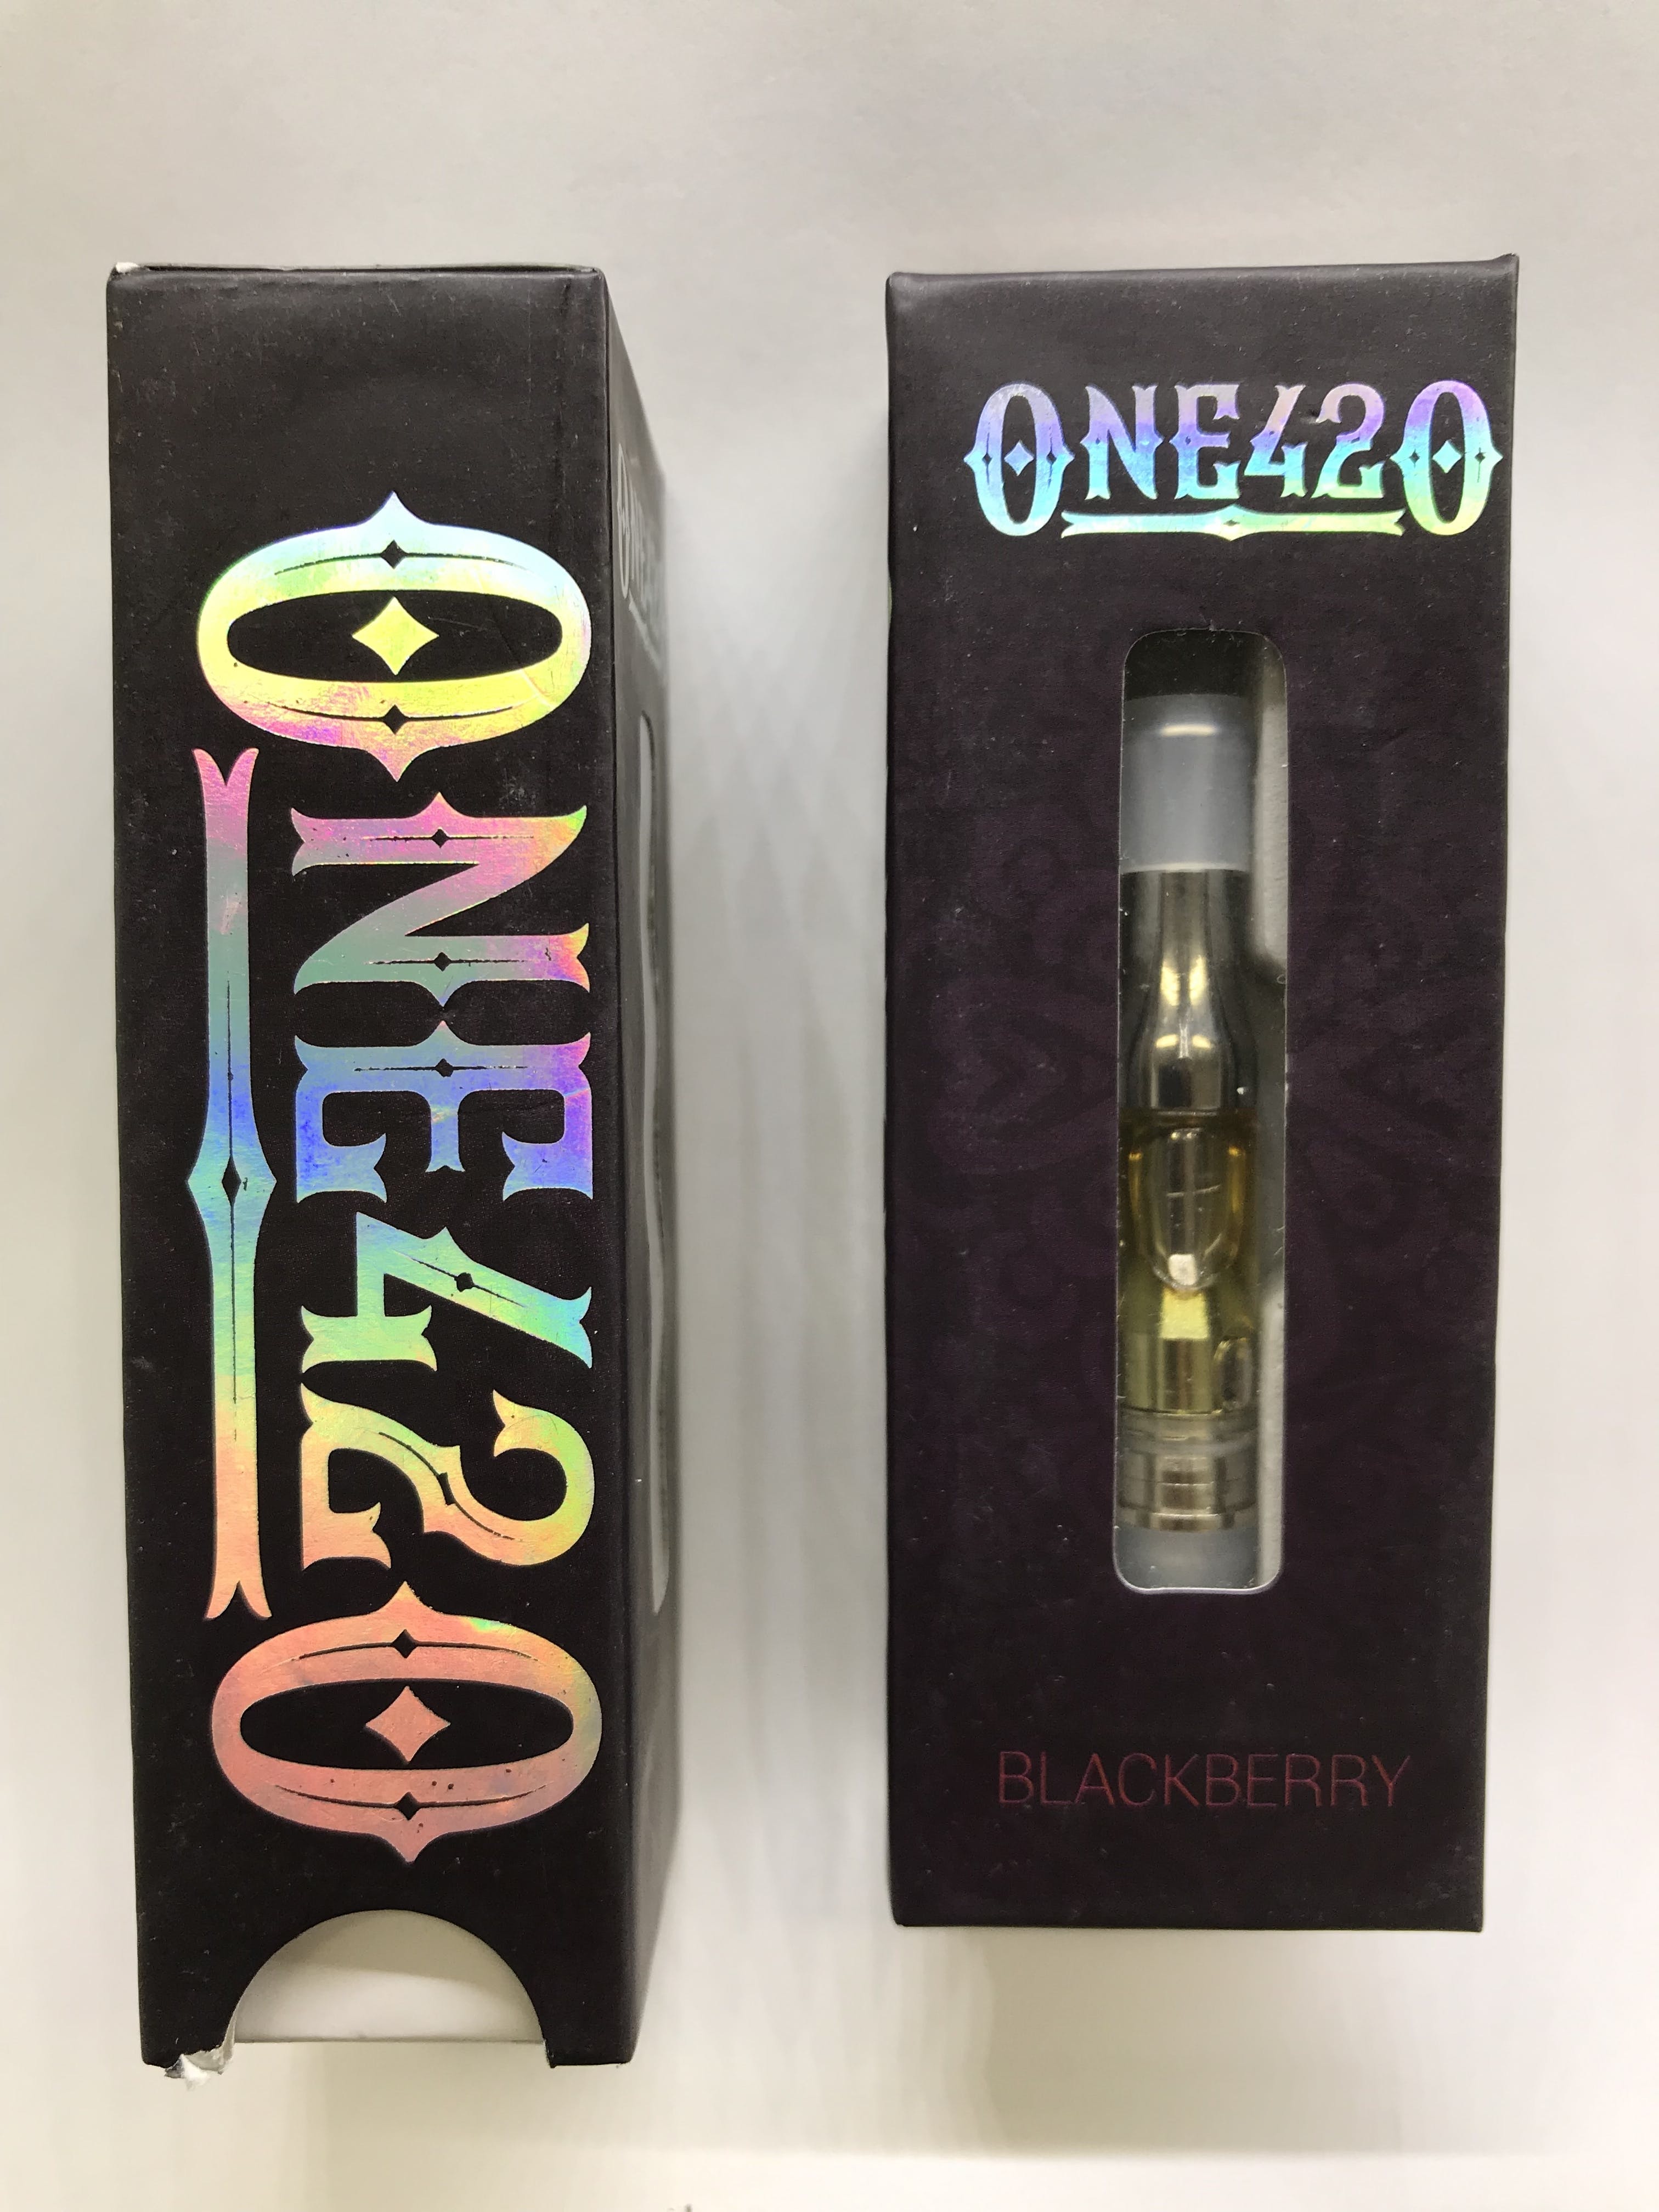 concentrate-one420-hybrid-cartridges